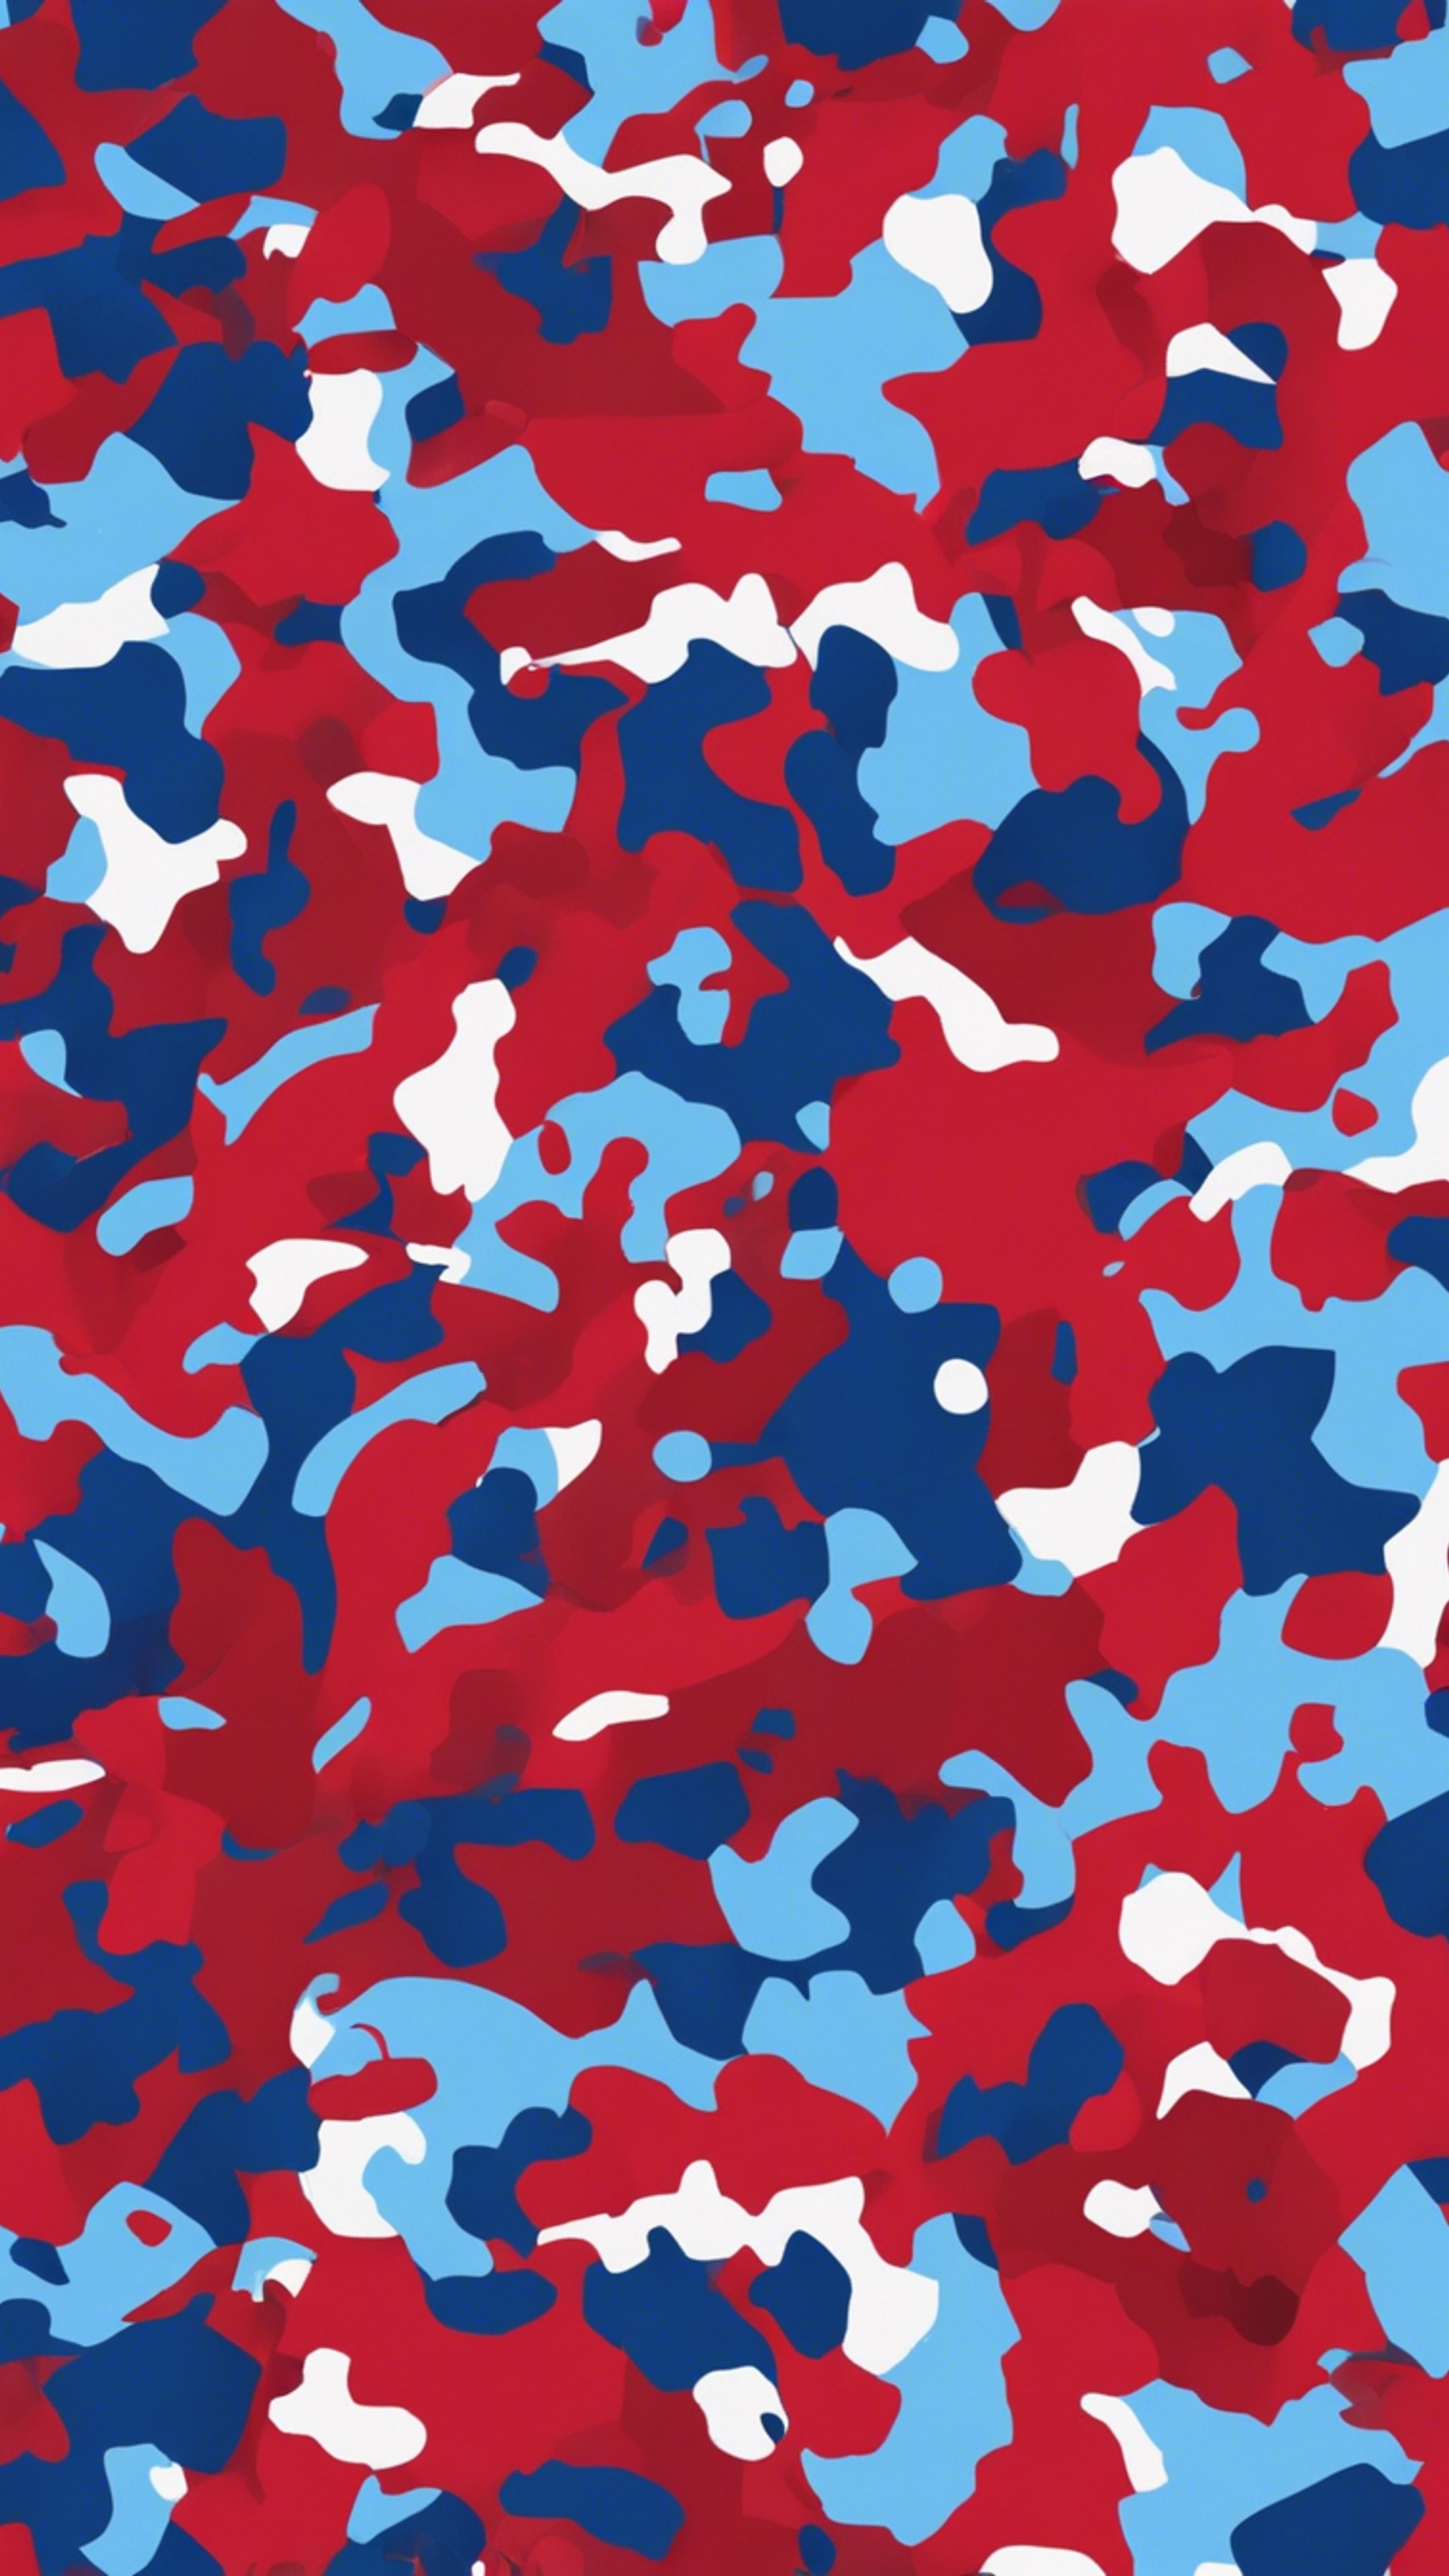 Camouflage pattern in shades of red and blue distributed randomly. Fondo de pantalla[29e12ceb4fee465f920c]